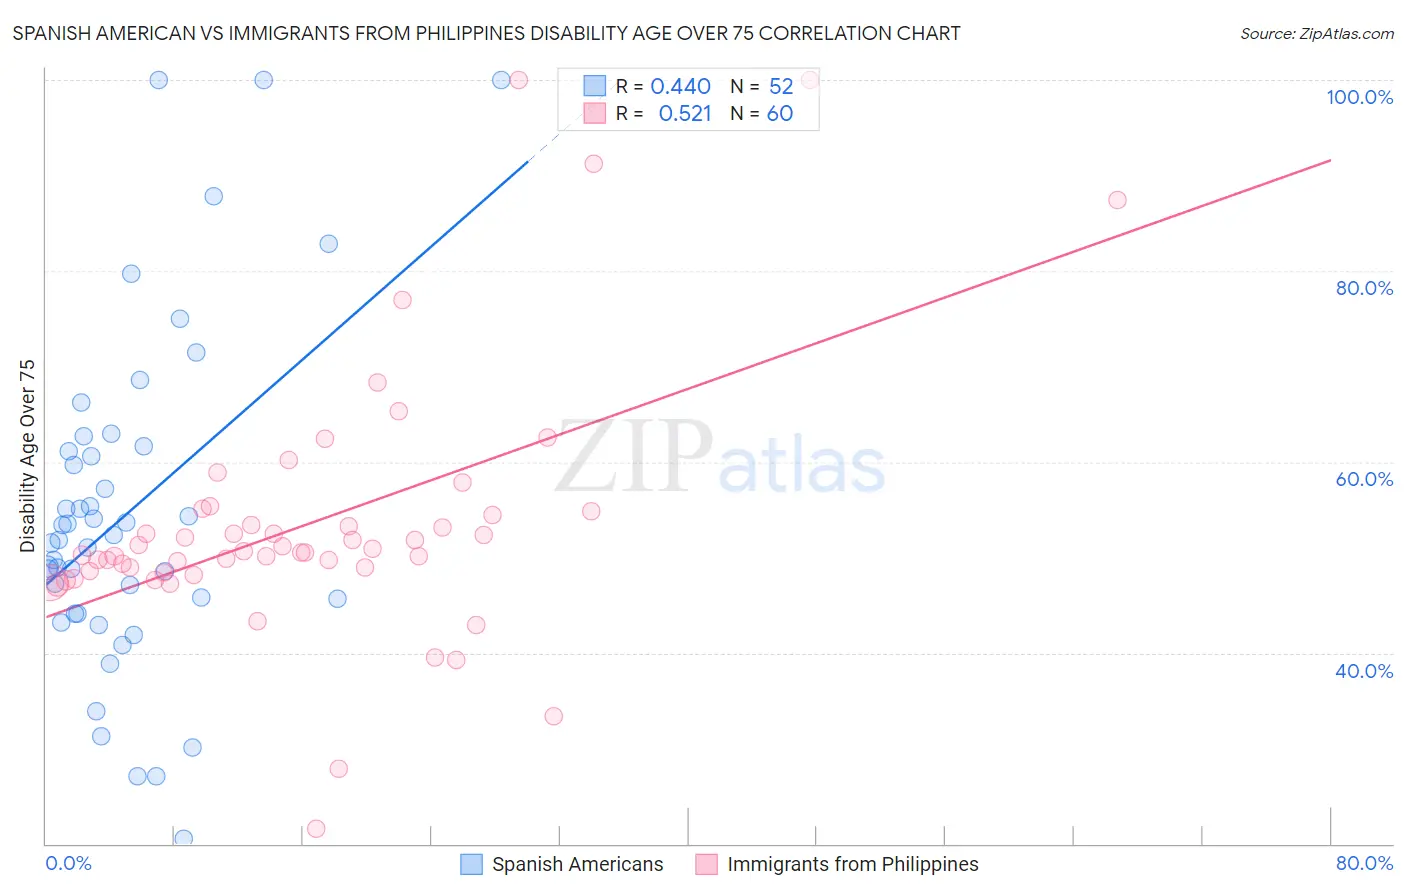 Spanish American vs Immigrants from Philippines Disability Age Over 75